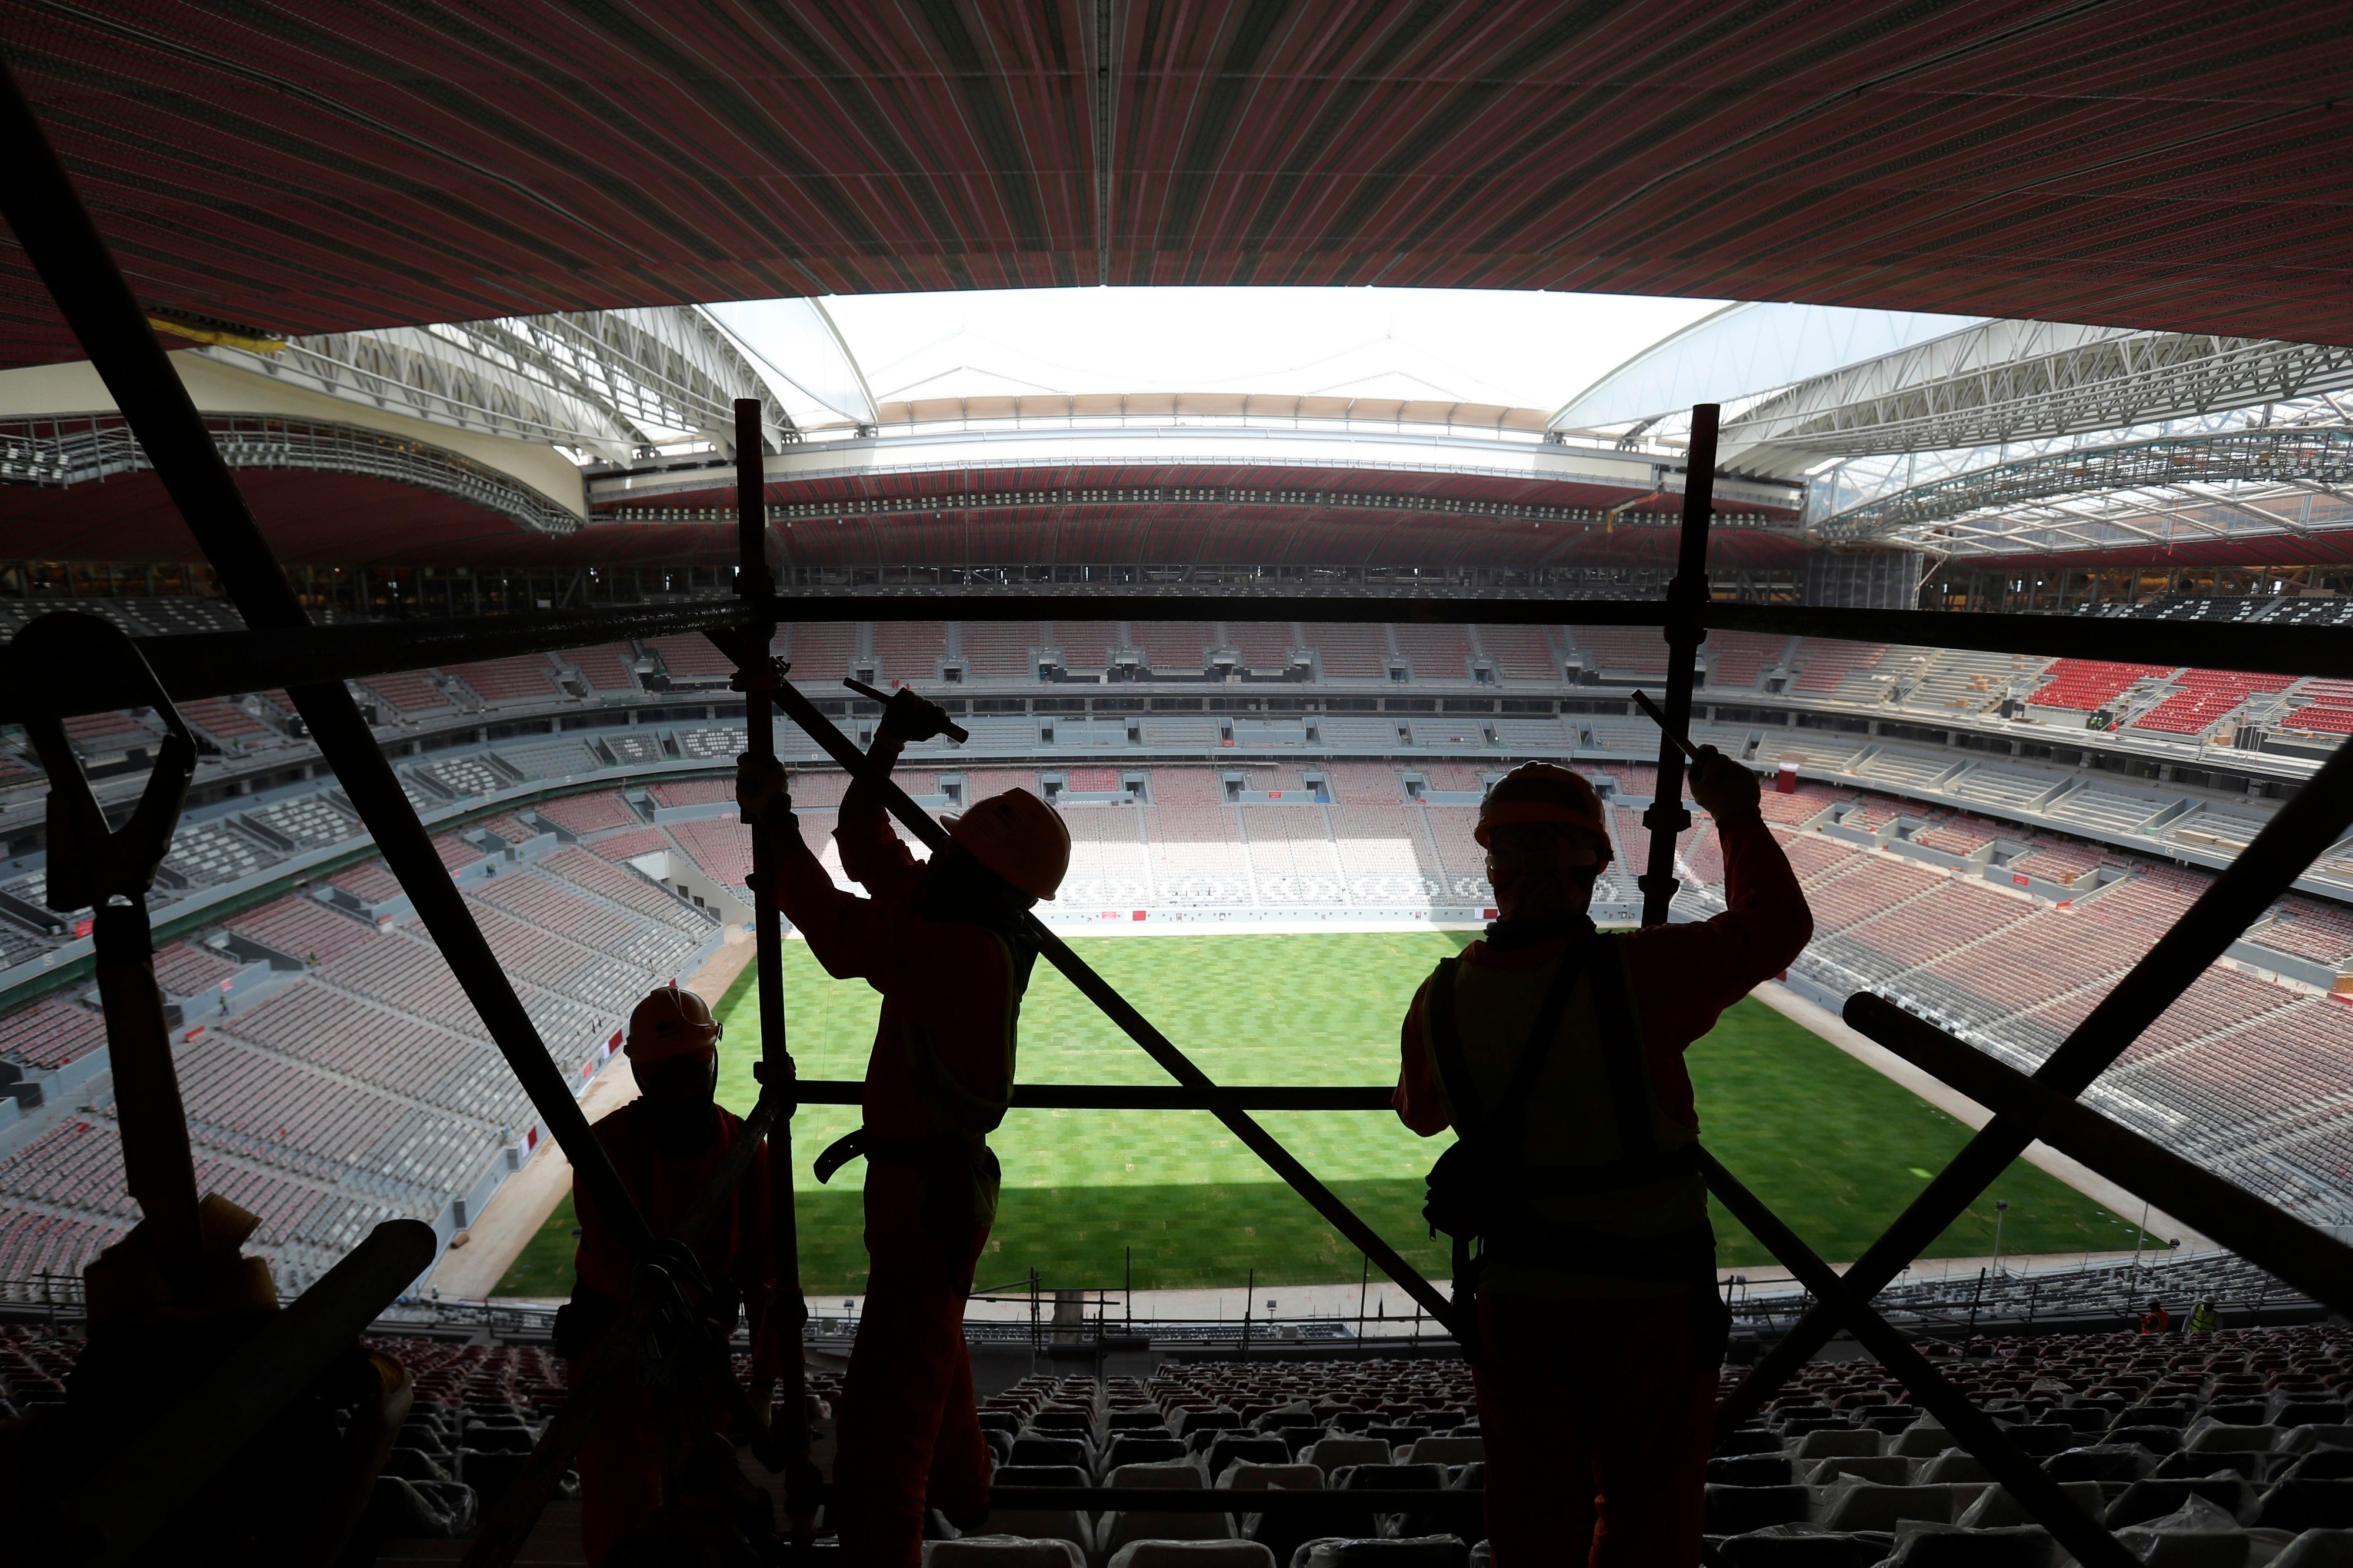 Labourers remove scaffolding at the Al Bayt stadium in Al Khor, Qatar on April 29, 2019. Migrant labourers who built Qatar’s World Cup stadiums often worked long hours under harsh conditions and were subjected to discrimination, wage theft and other abuses, a rights group said. Photo: AP